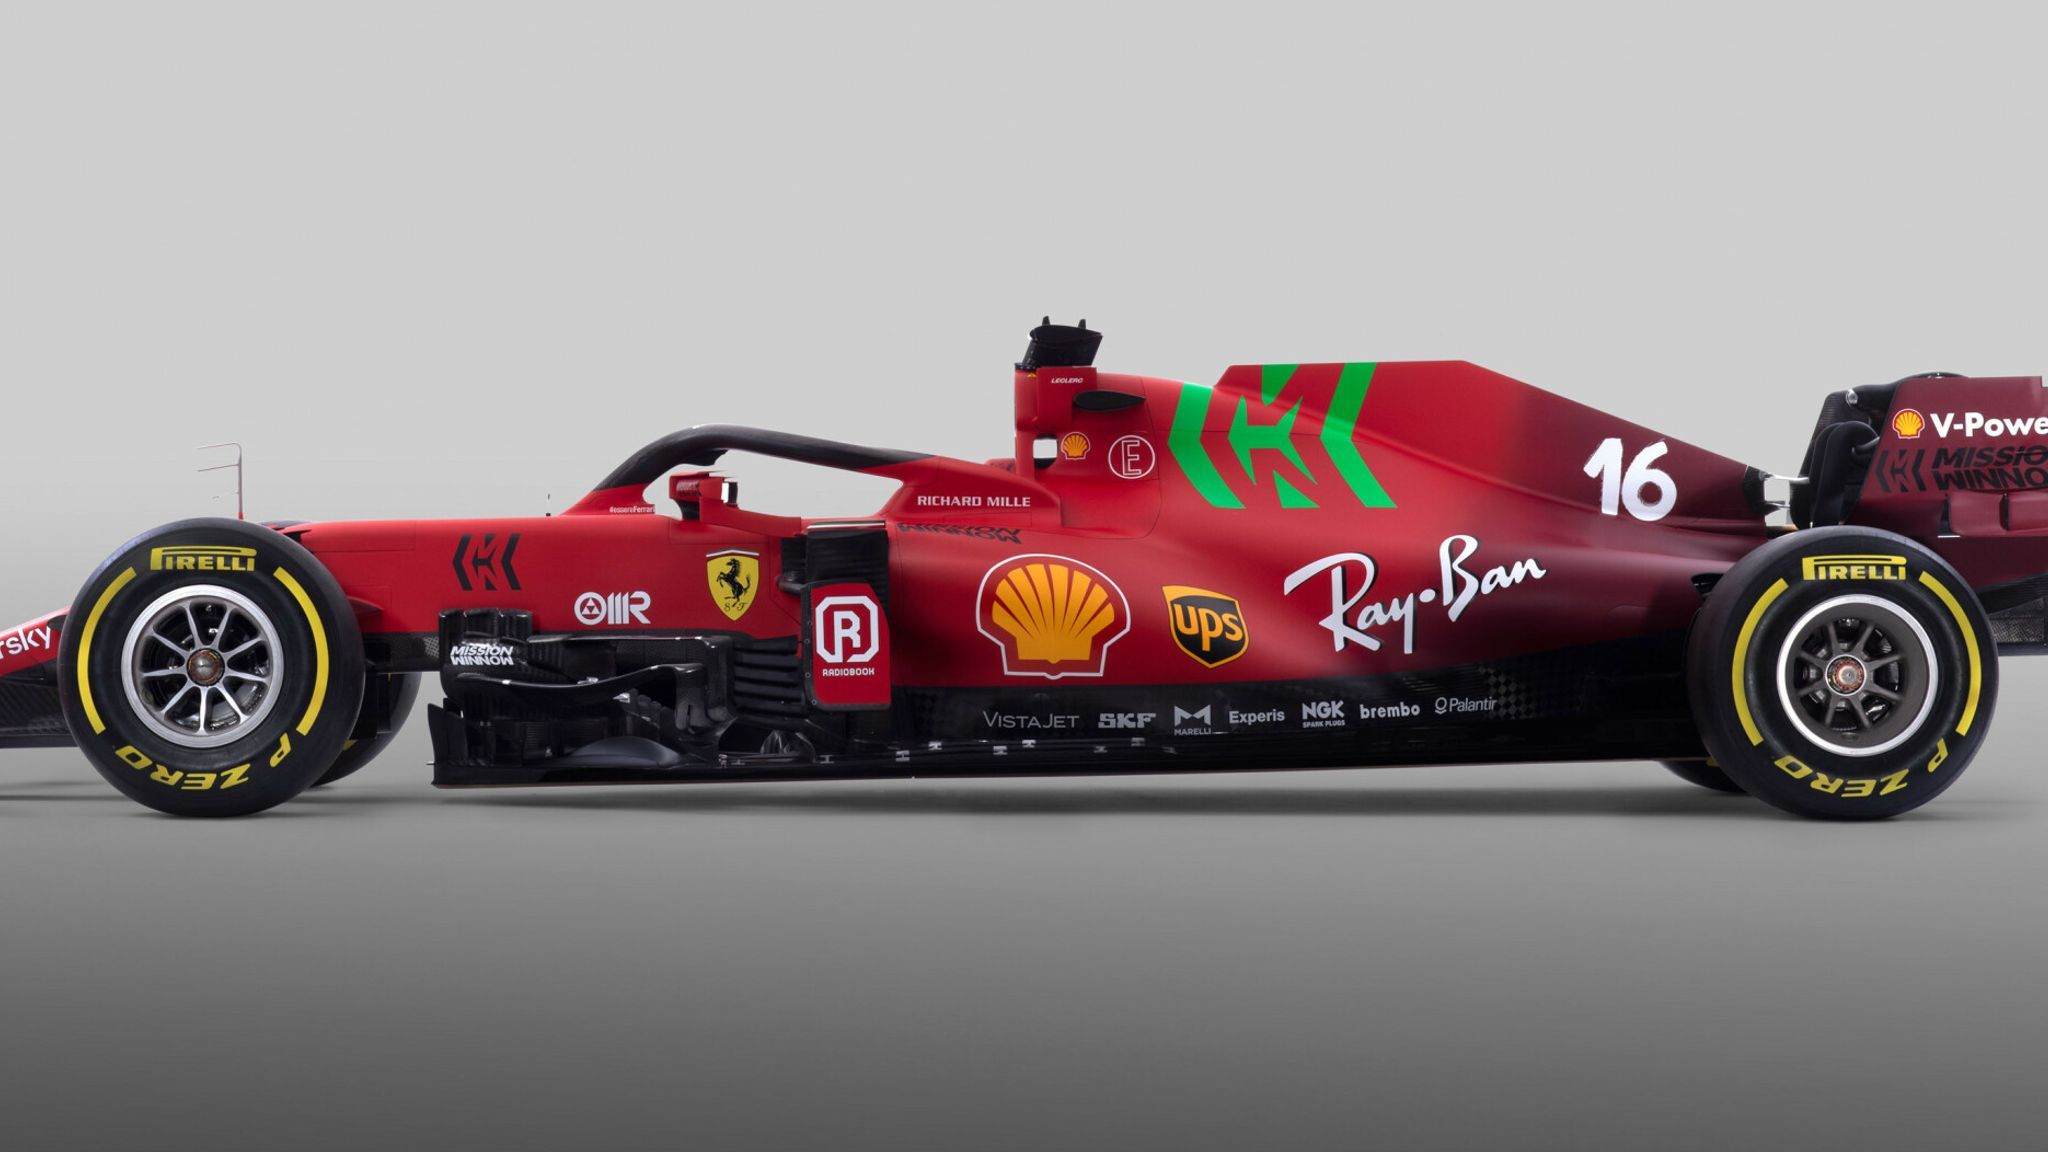 Ferrari Launch SF21 Car For 2021 Formula 1 Season With New Engine And Hope Of Much Improved Form